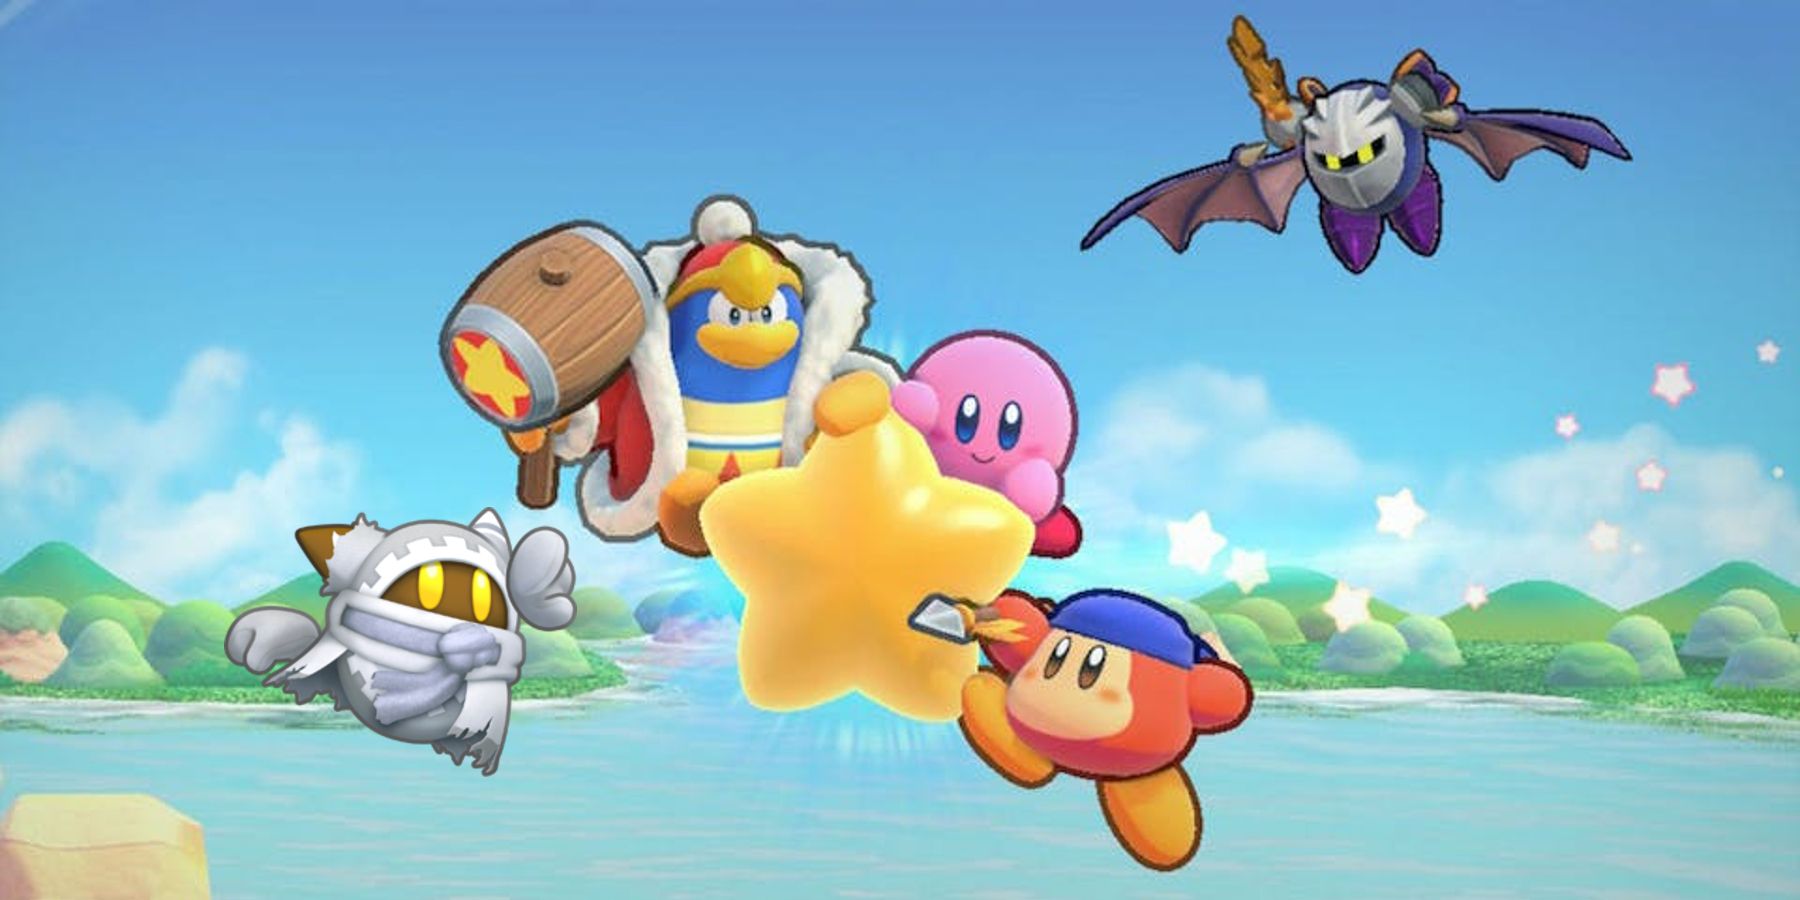 team kirby clash spin off canon epilogue story